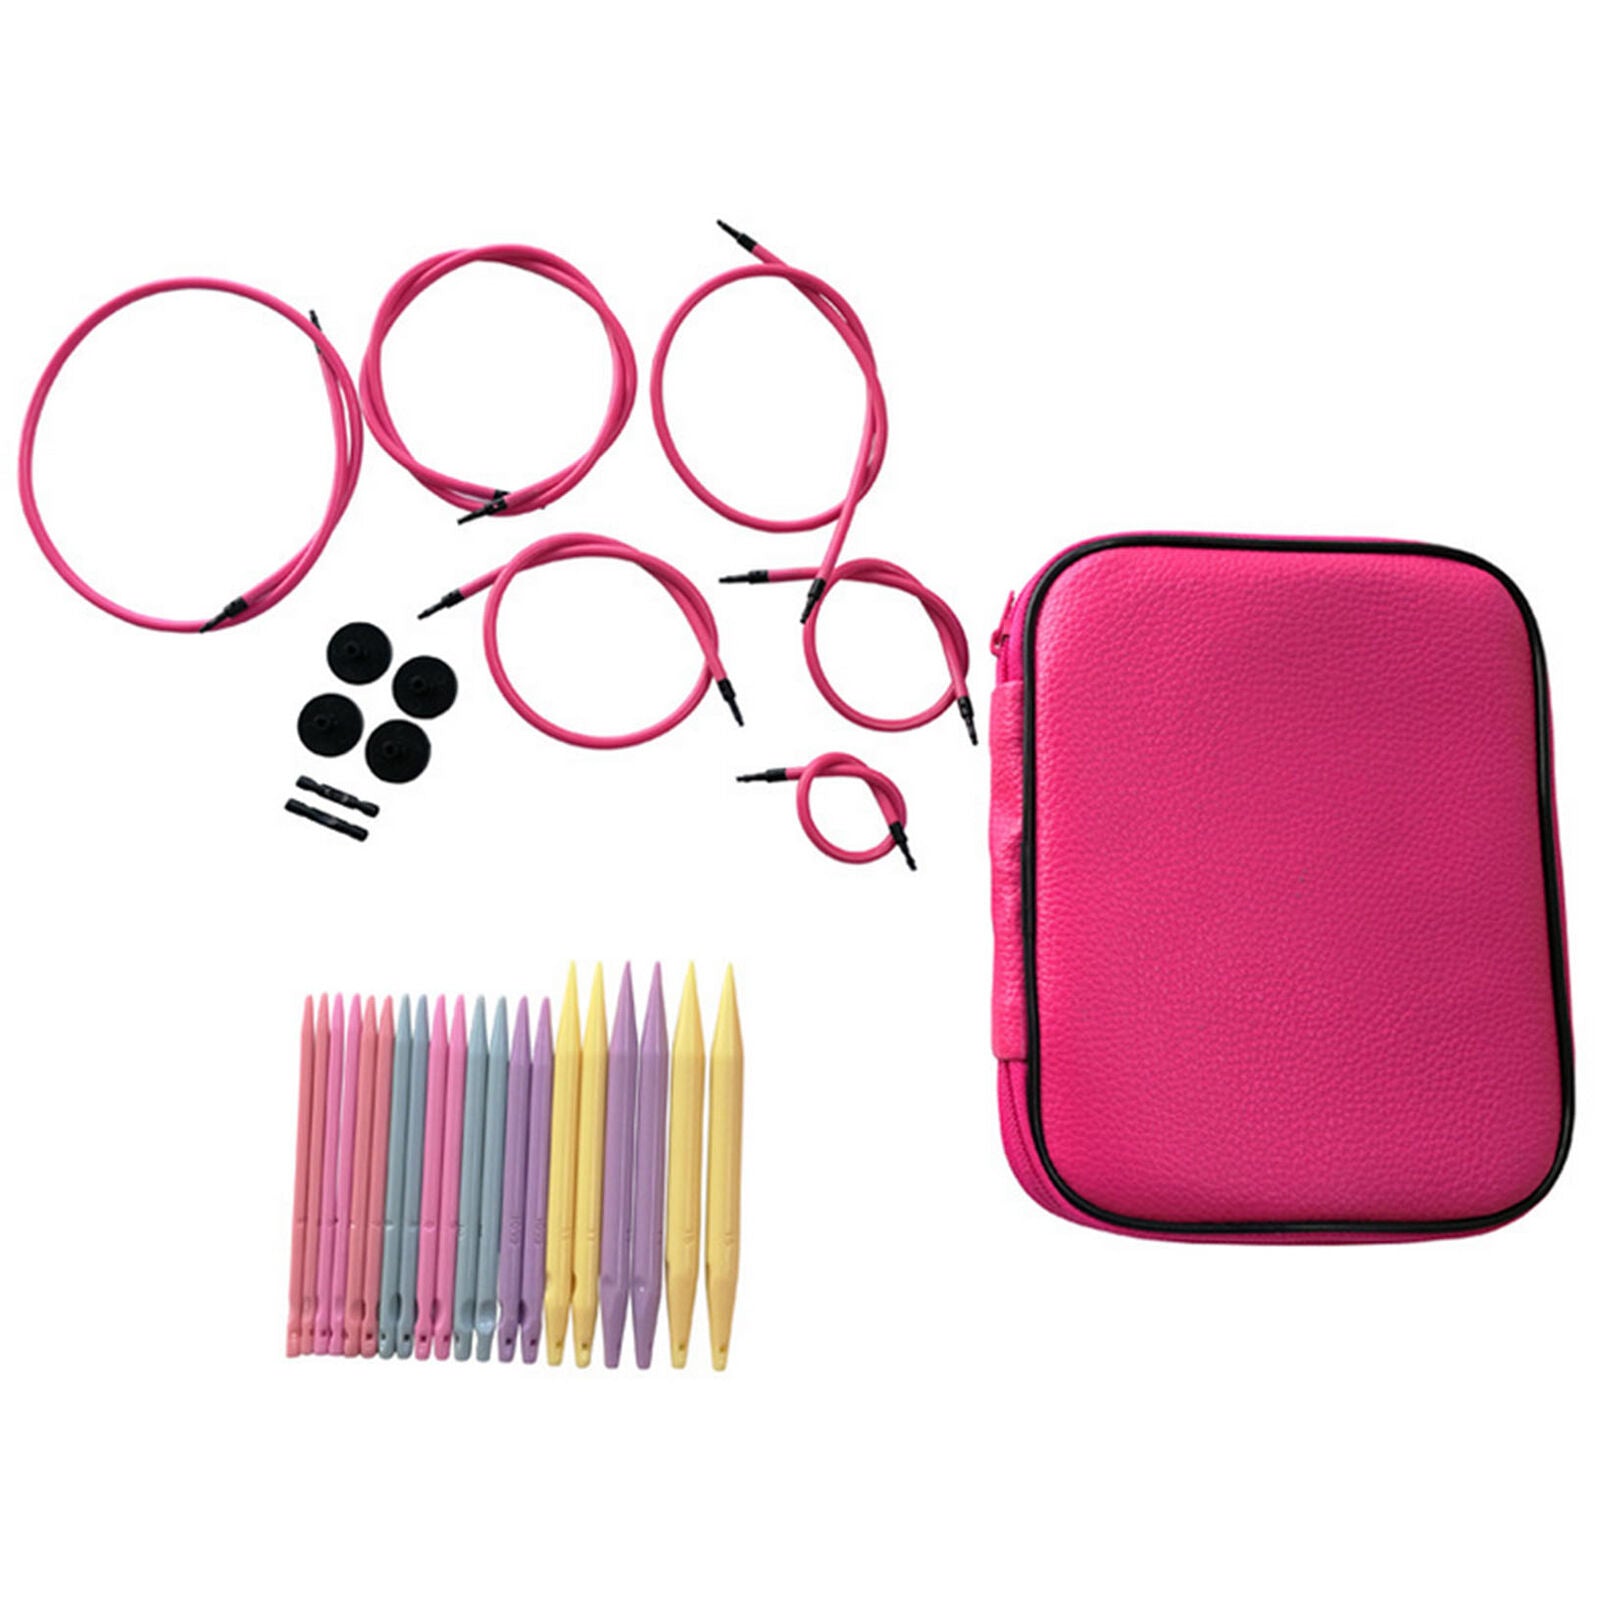 Circular Knitting Needle and Cable Interchangeable Knitting Needle Set